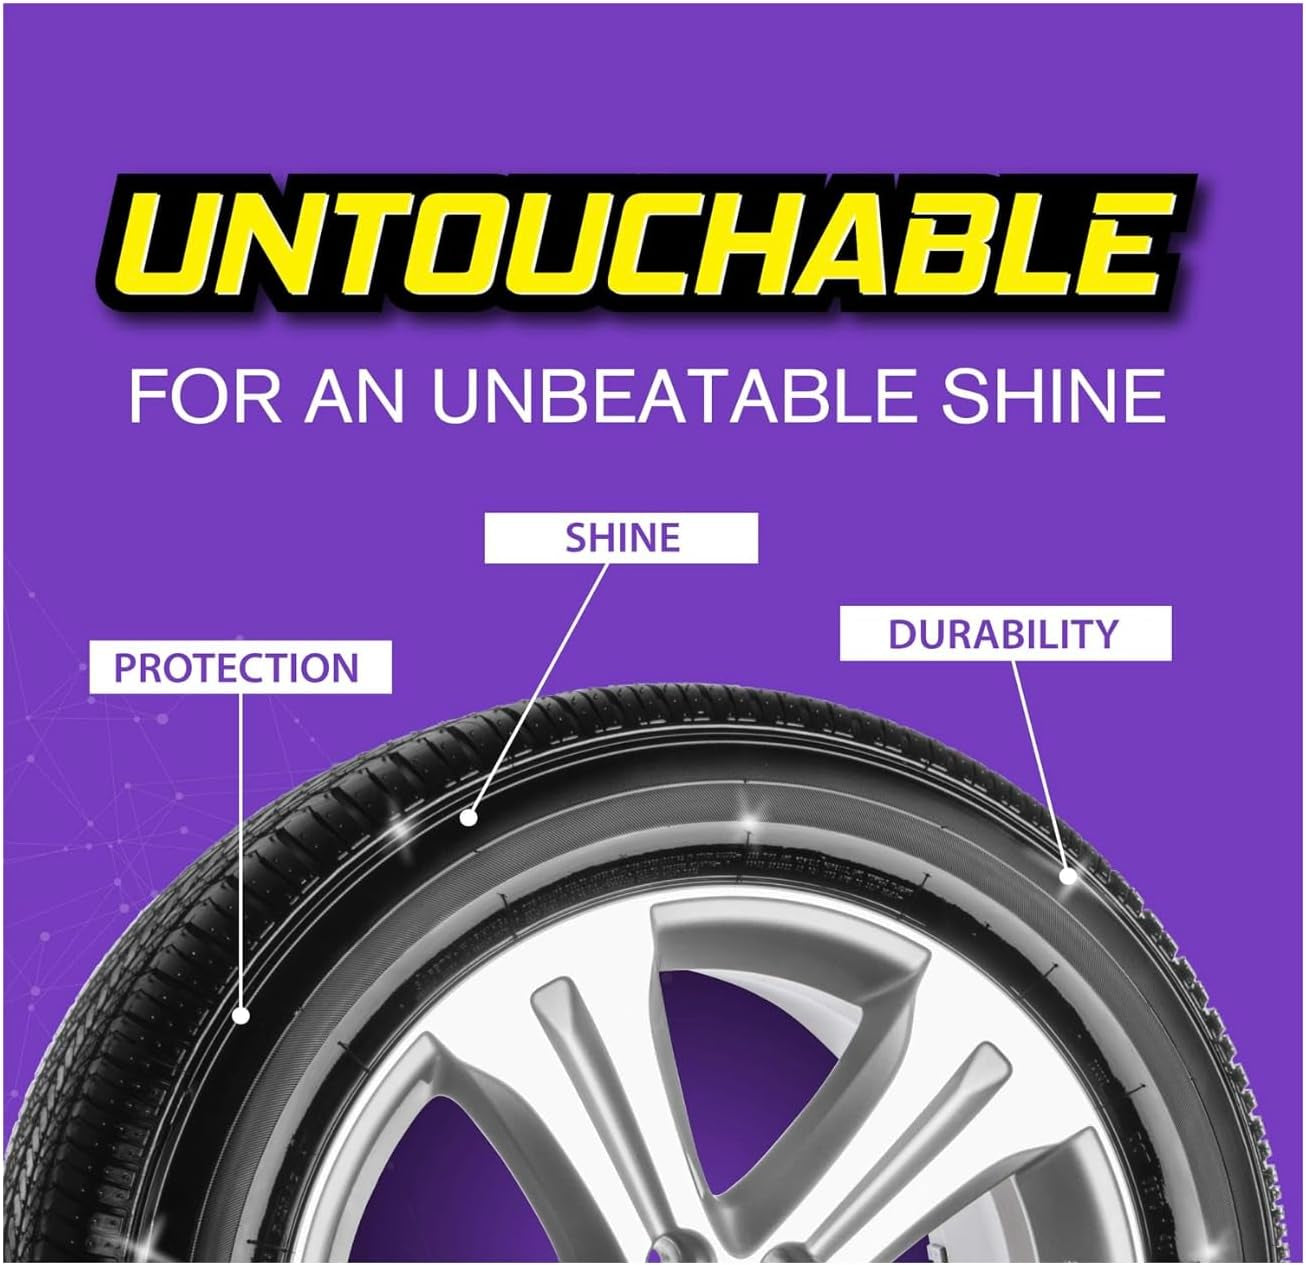 Untouchable Wet Tire Finish, 13 Ounce (Pack of 3)